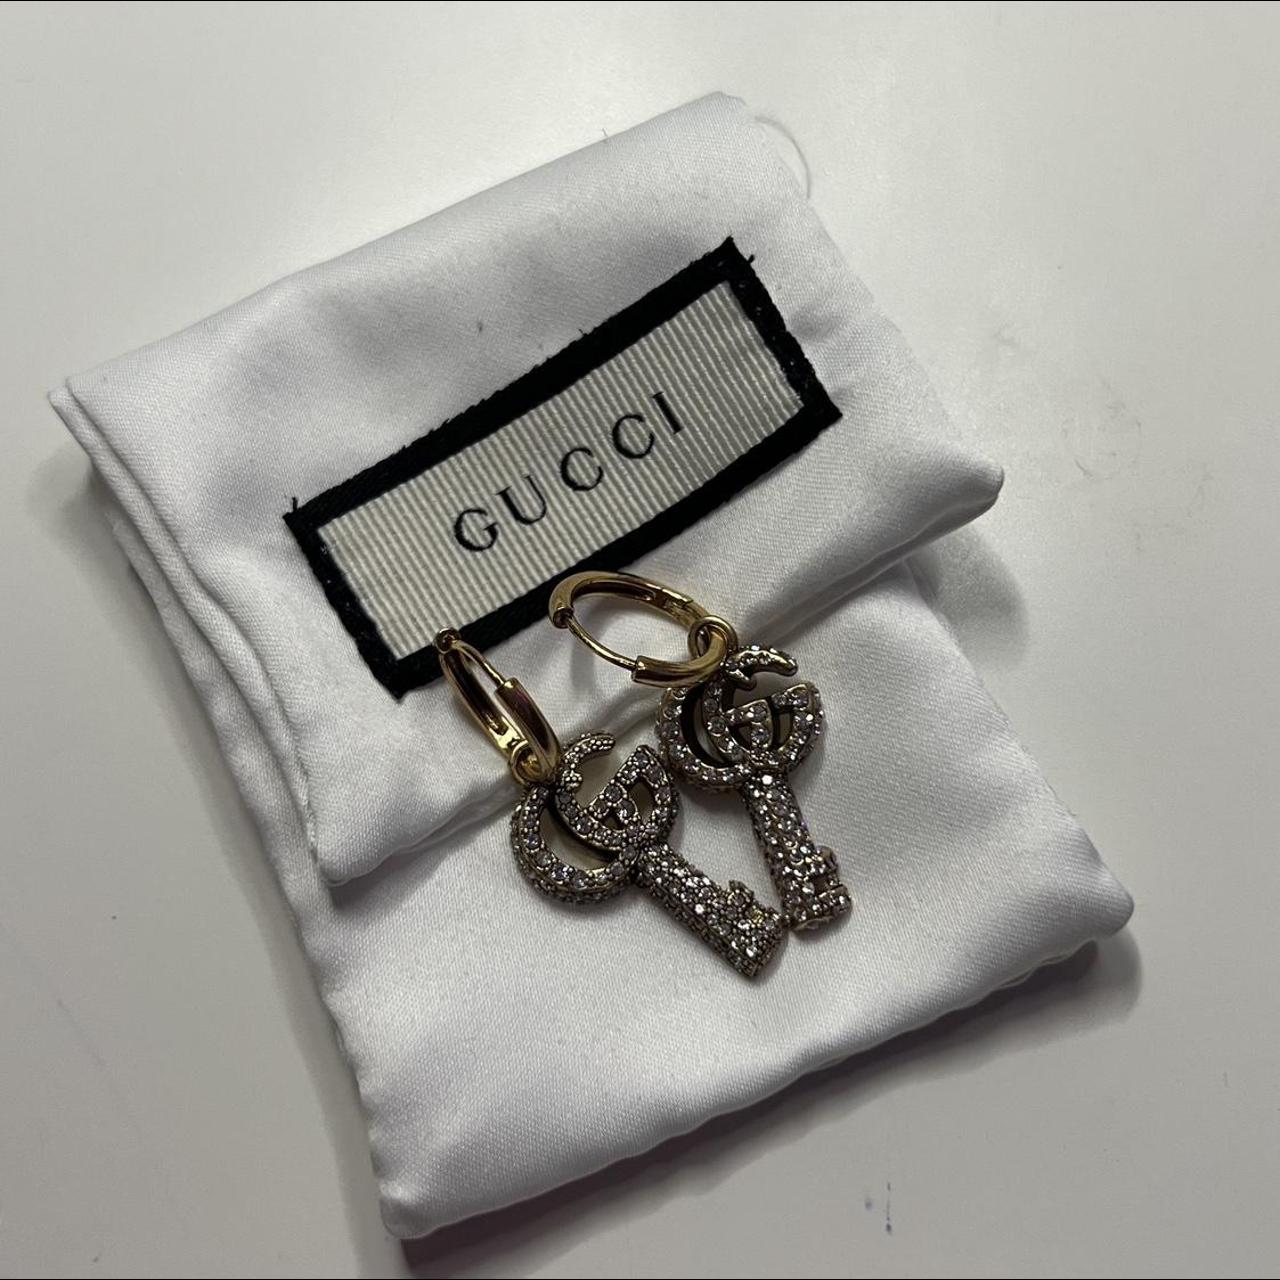 Authentic Gucci sparkling key earrings Gold Never... - Depop